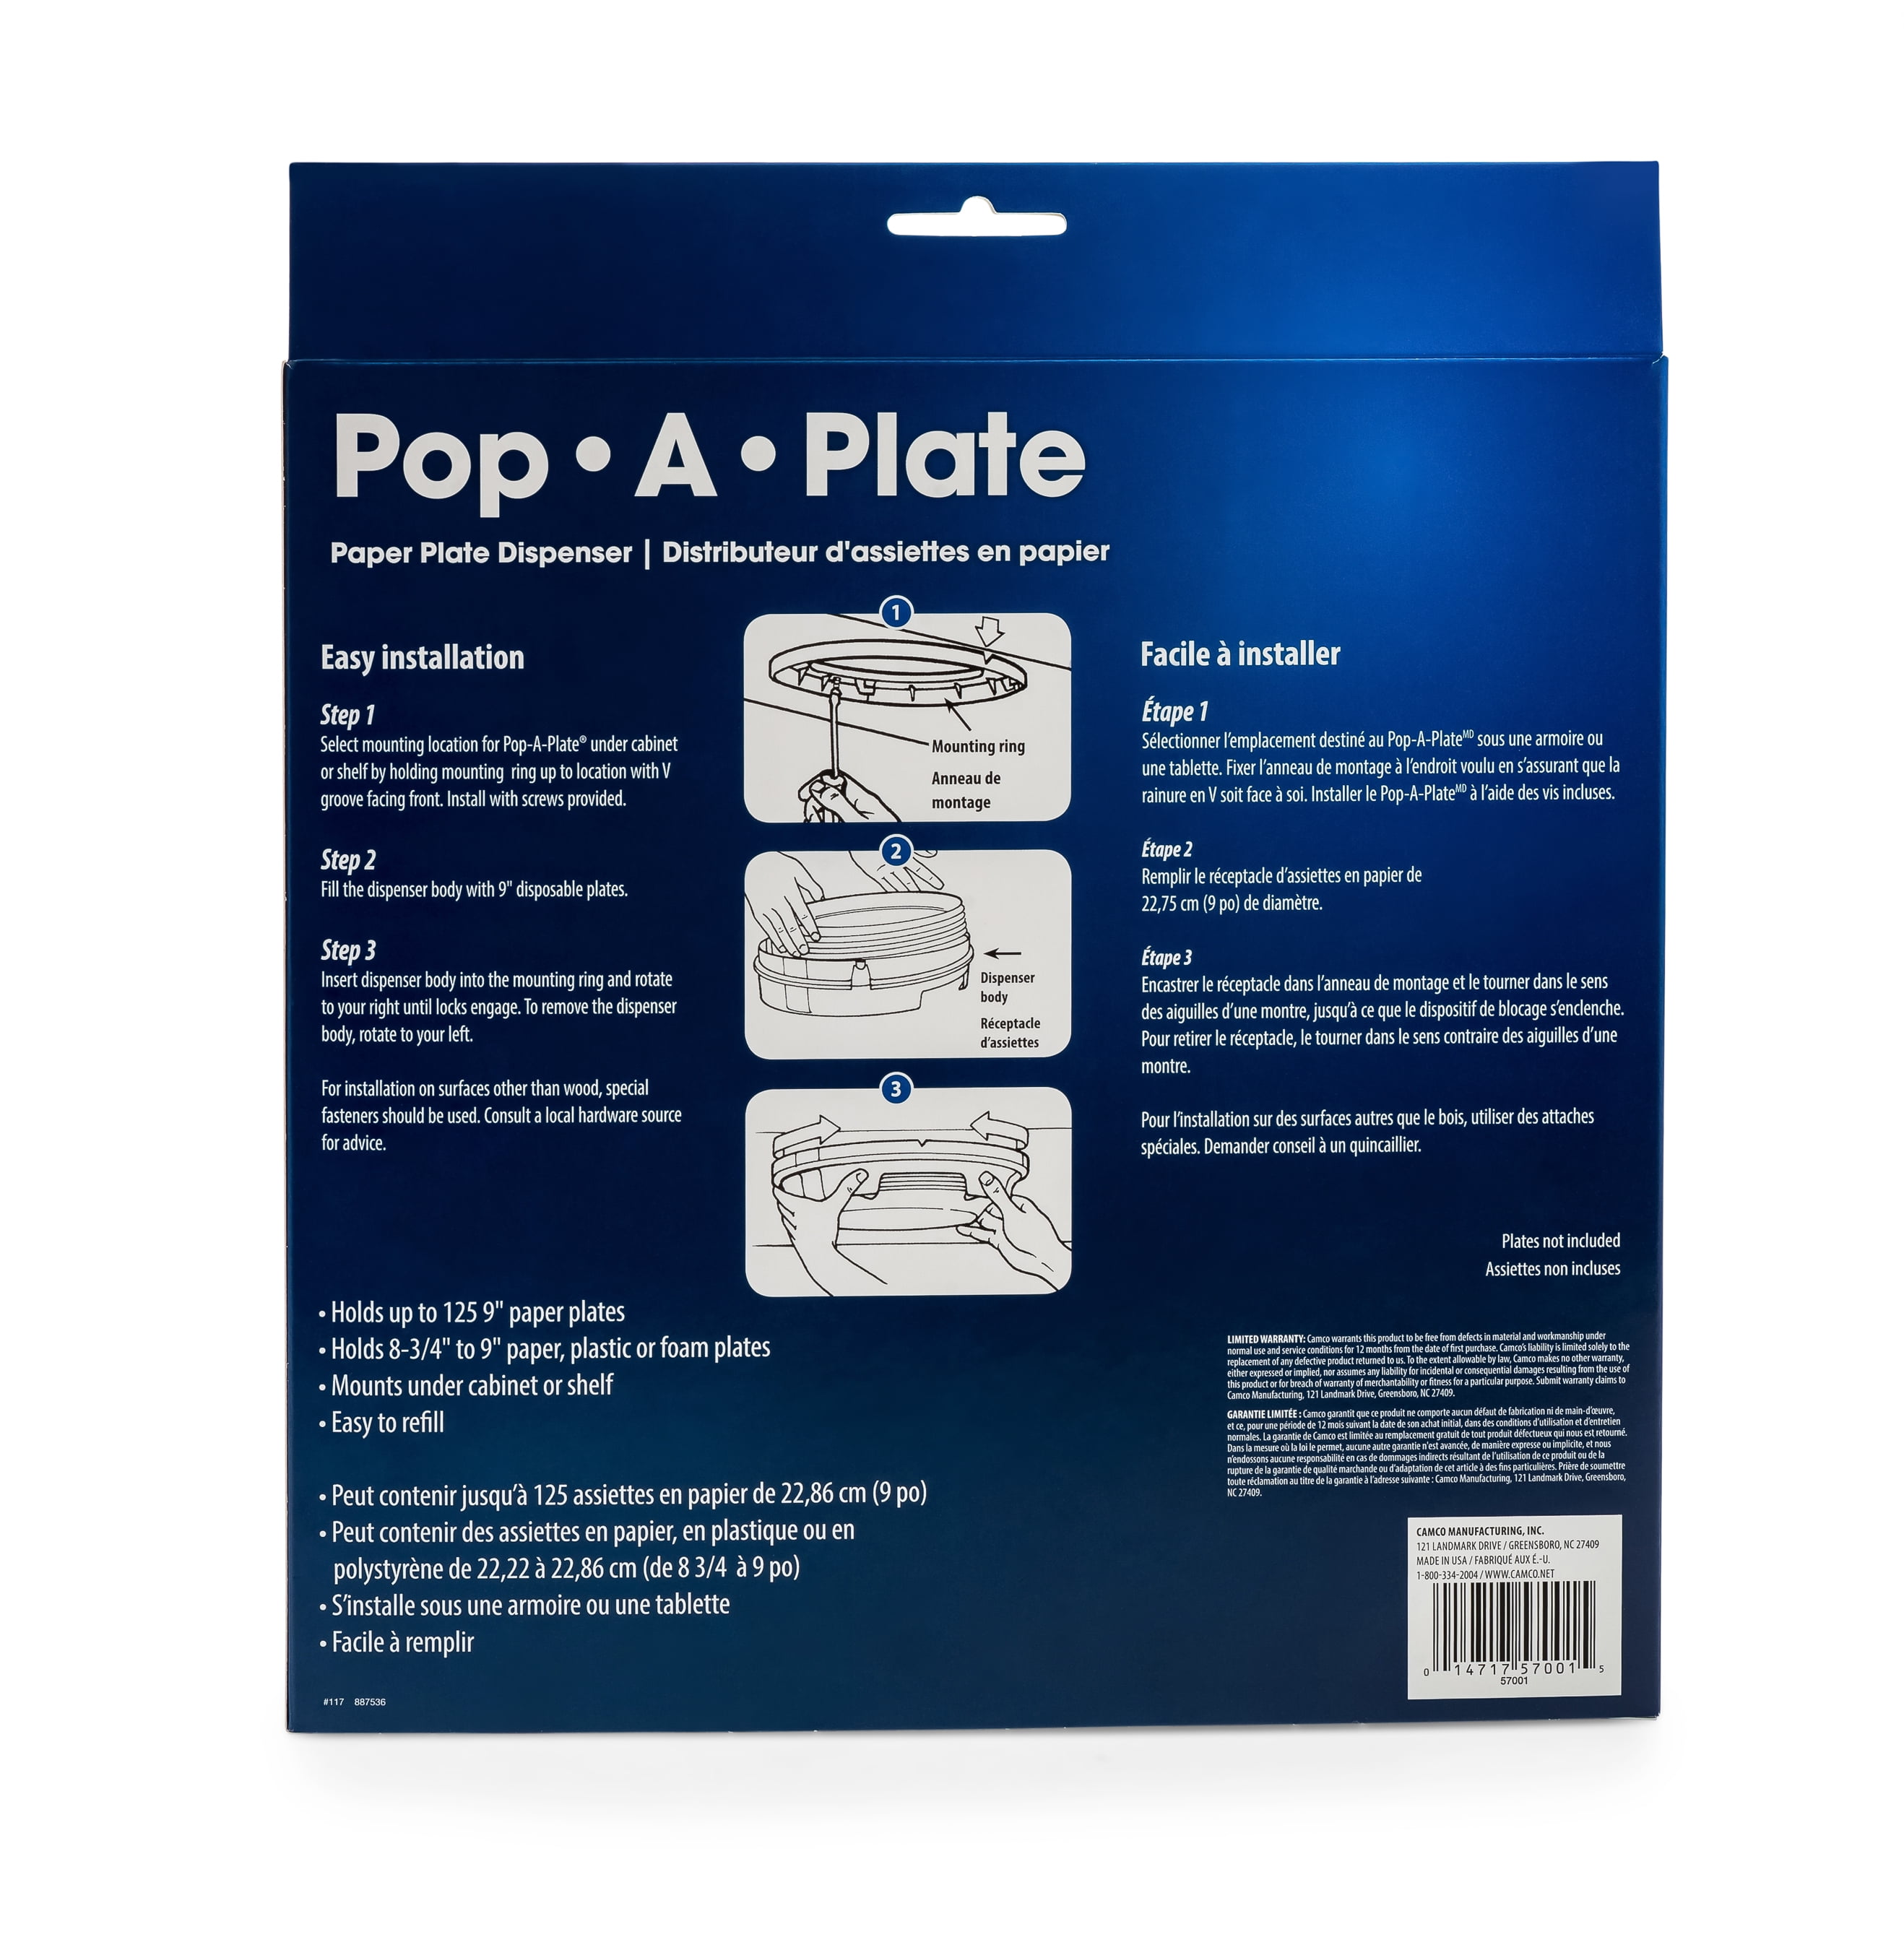 Camco Pop-a-Plate: $5 Tool To Organize Paper Plates Under Drawers – SheKnows